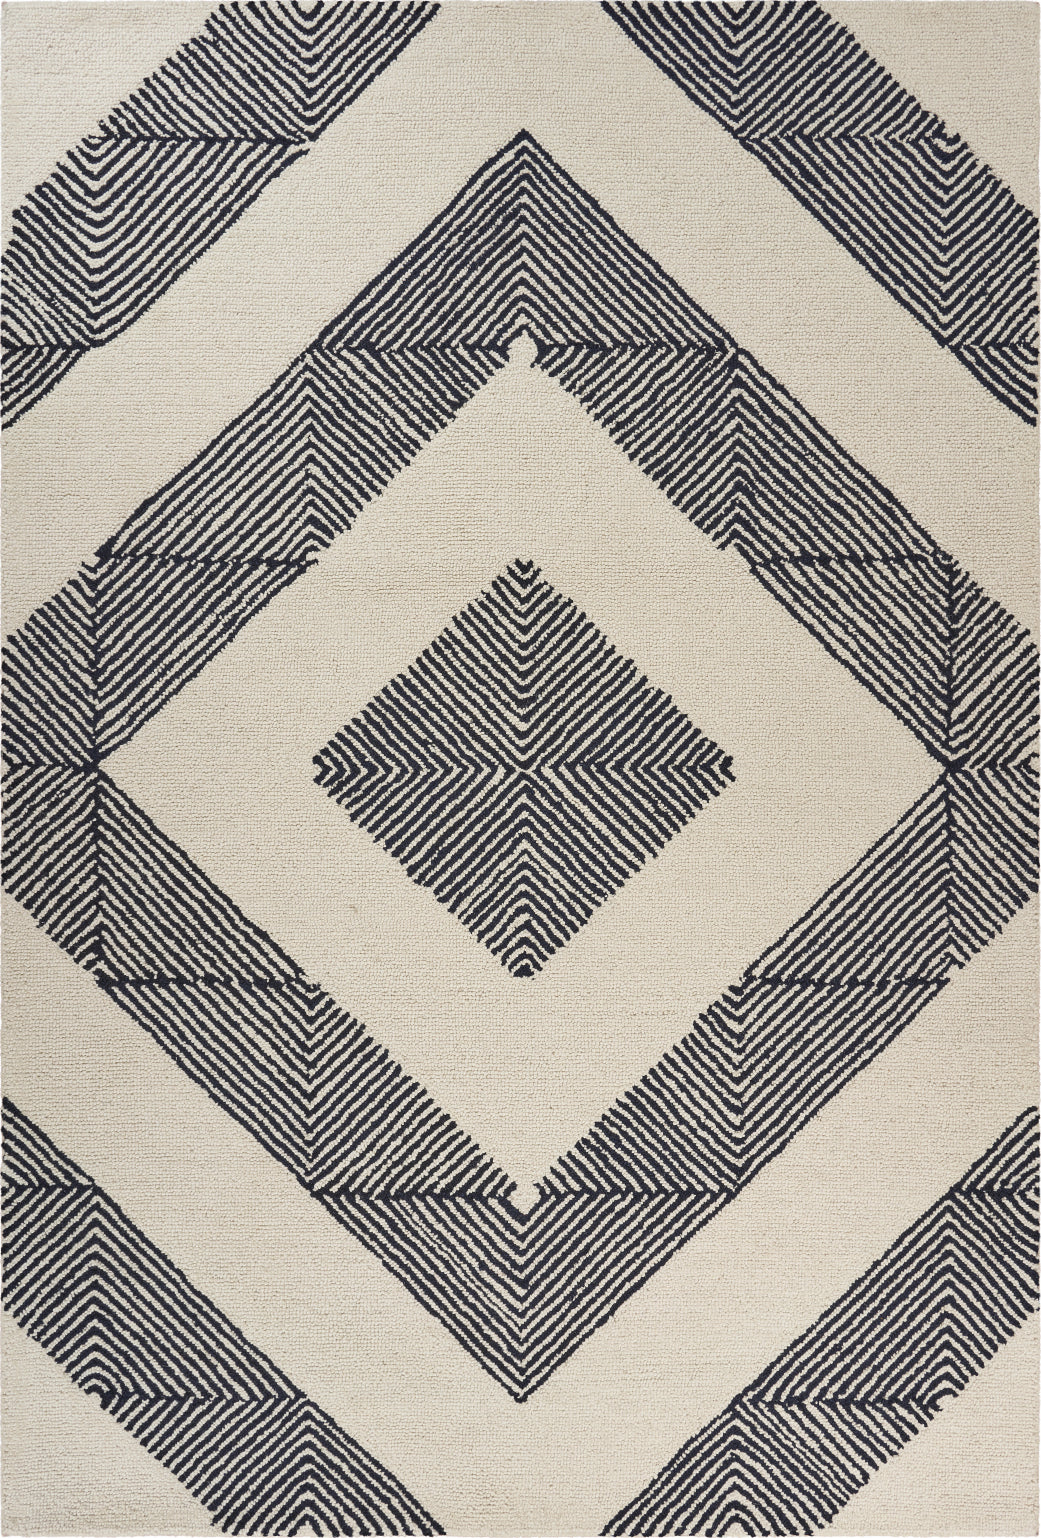 LR Resources Divergence Geometric Groove Ivory Area Rug main image